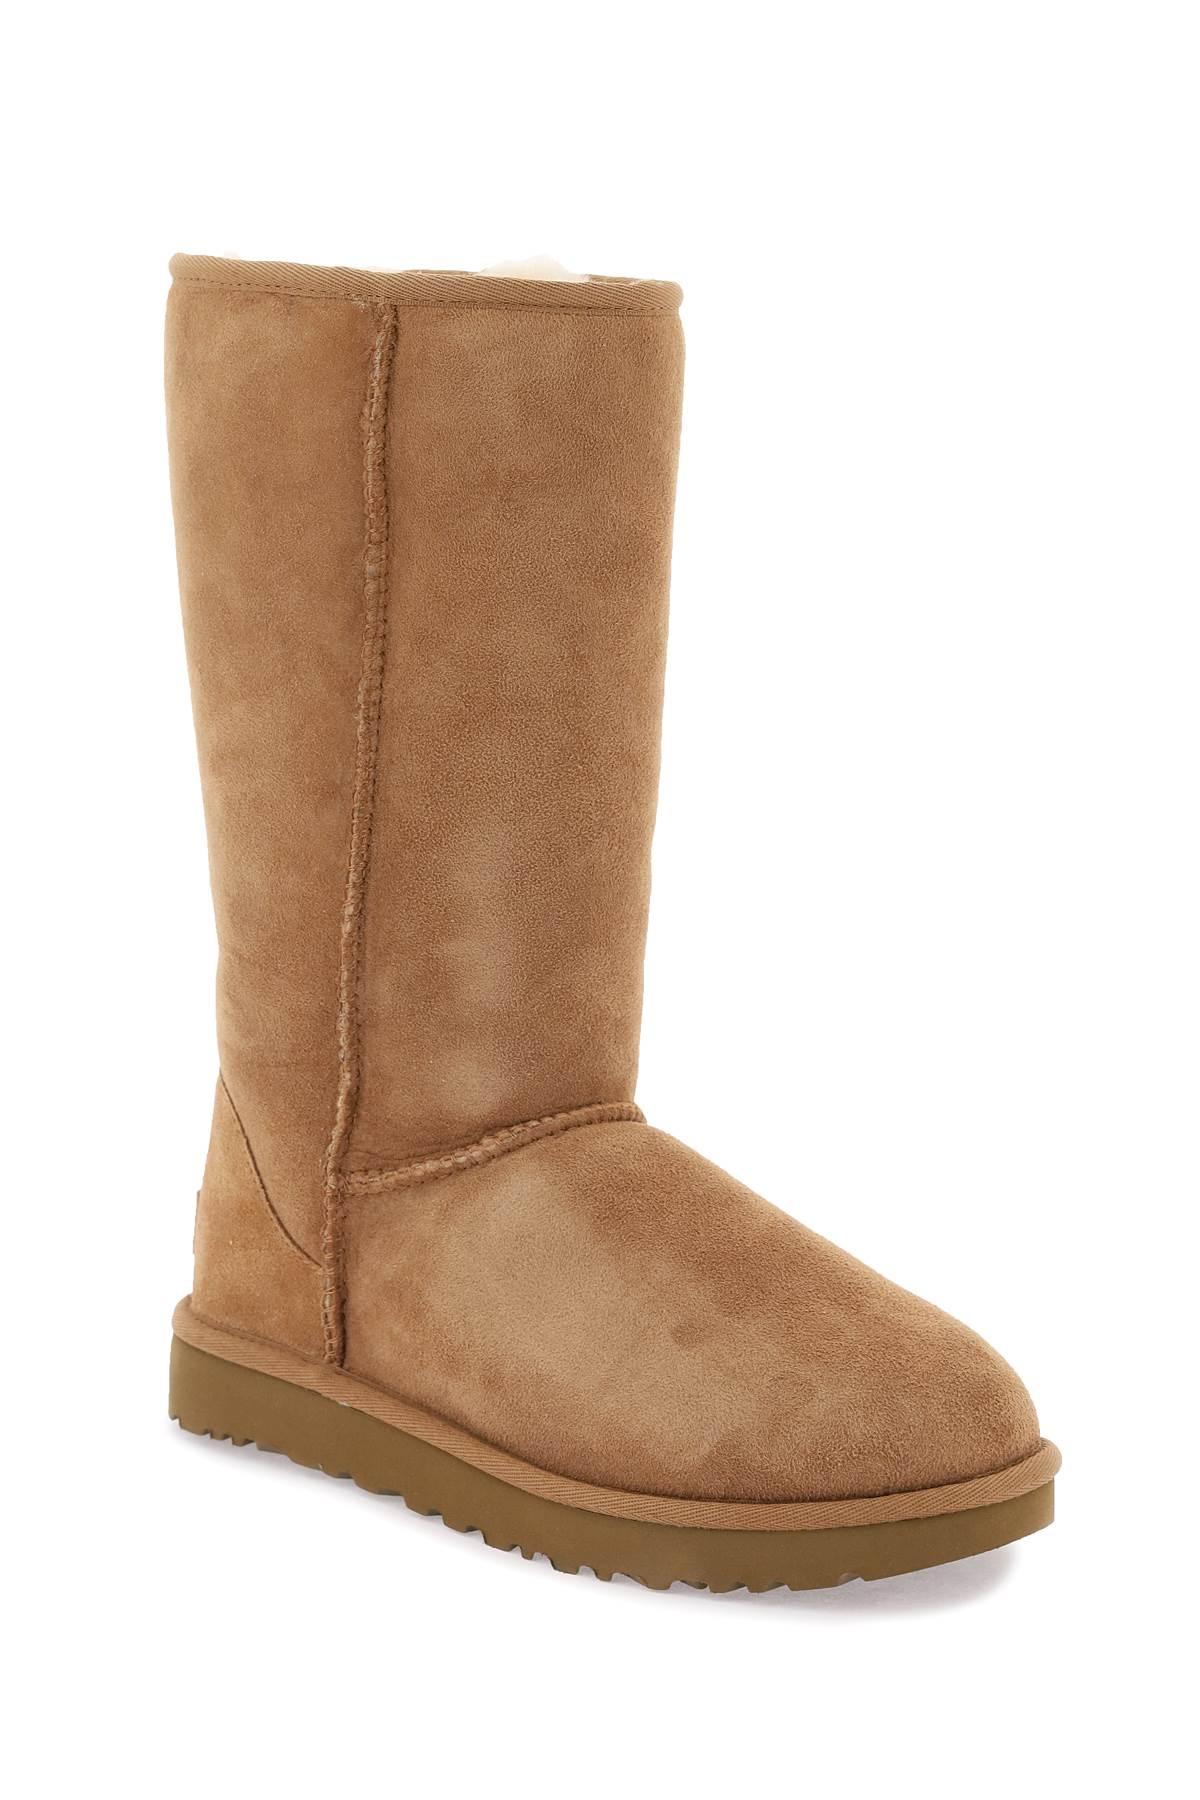 UGG Classic Tall Ii Boots in Brown | Lyst